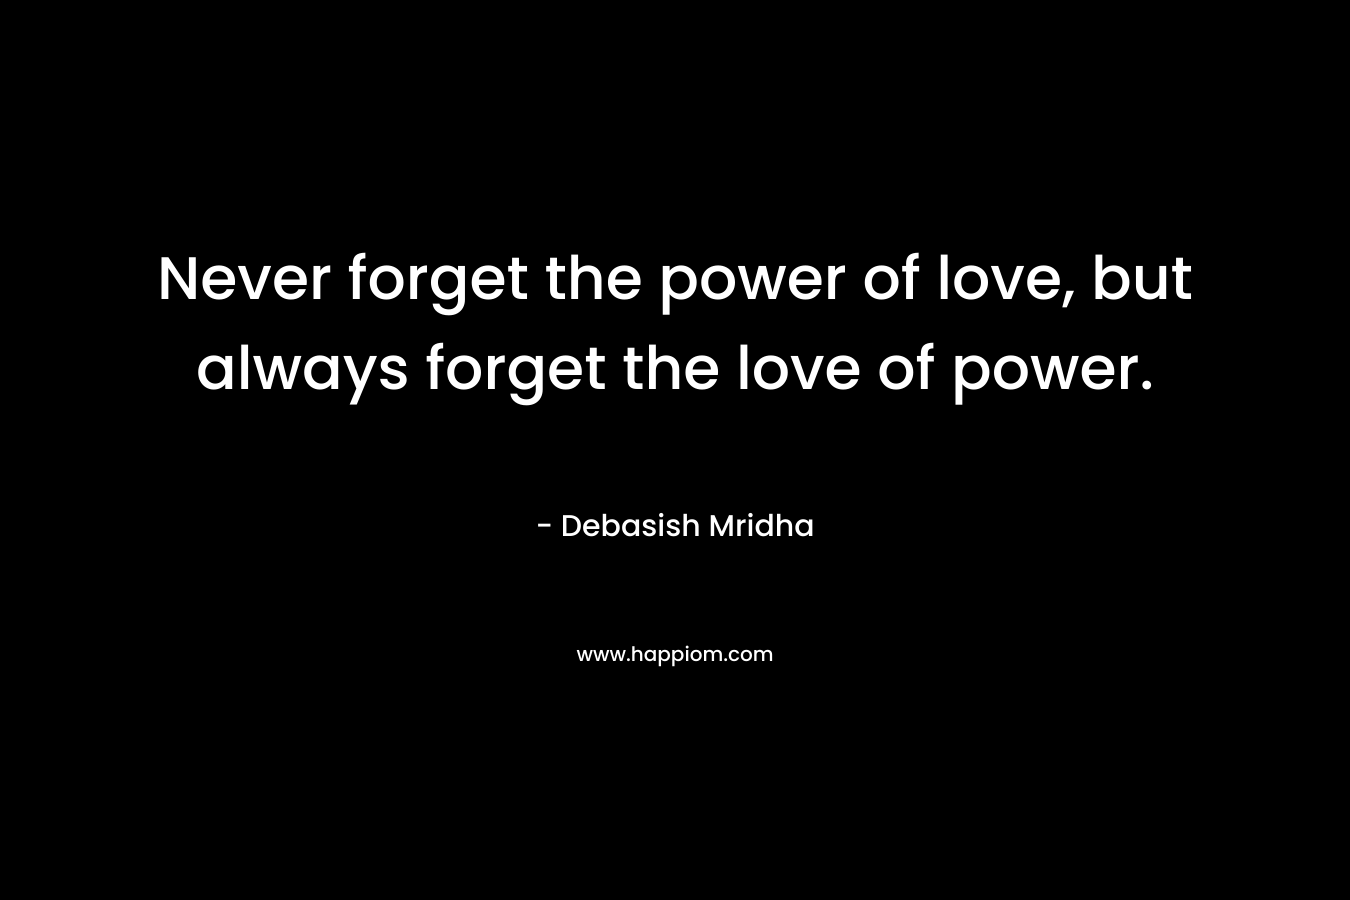 Never forget the power of love, but always forget the love of power.